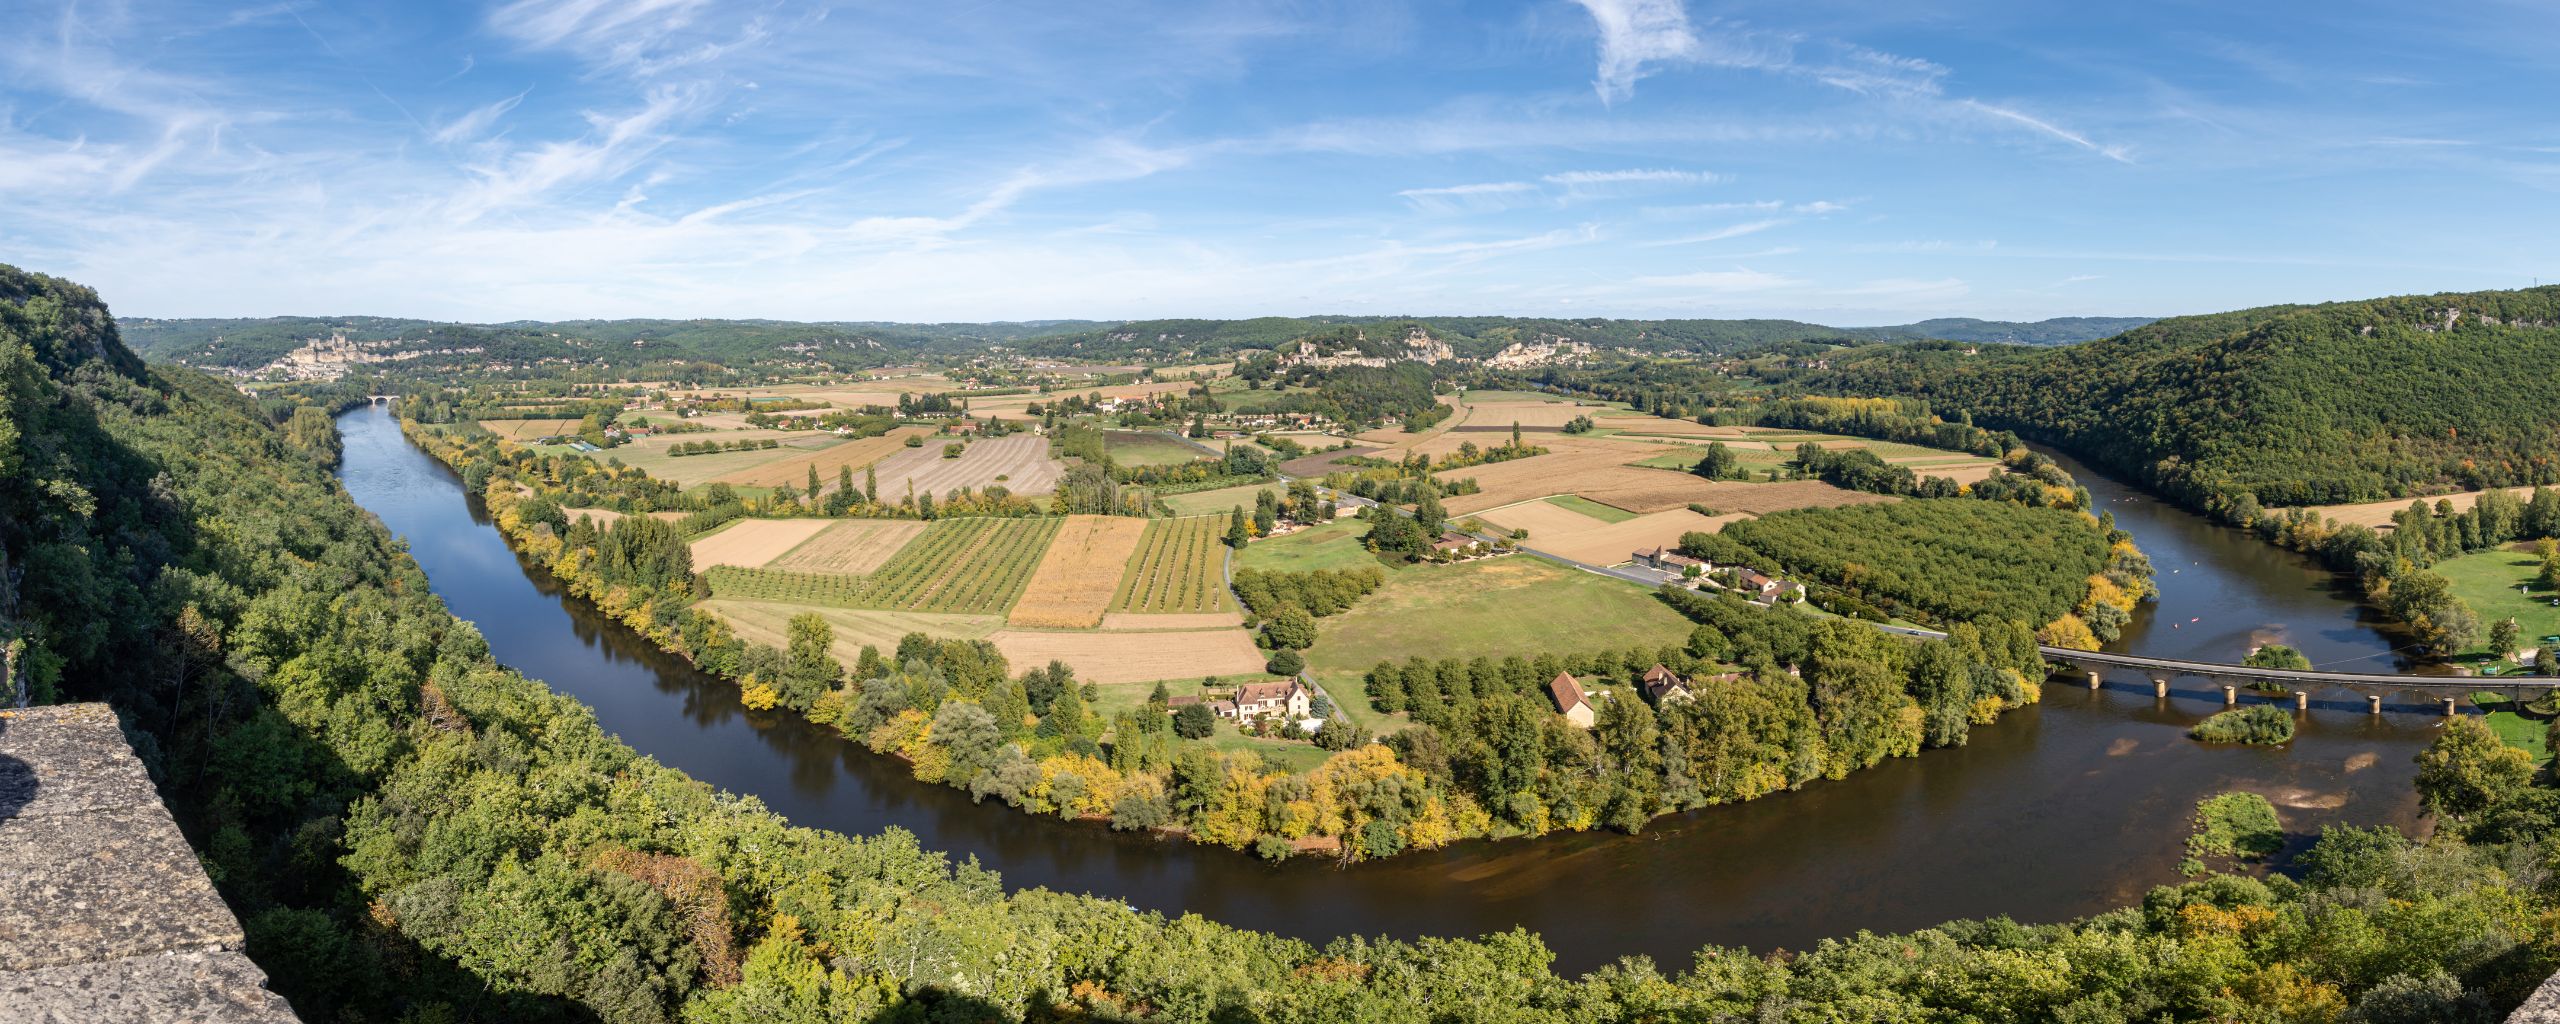 The Dordogne River valley through France is best seen by bicycle